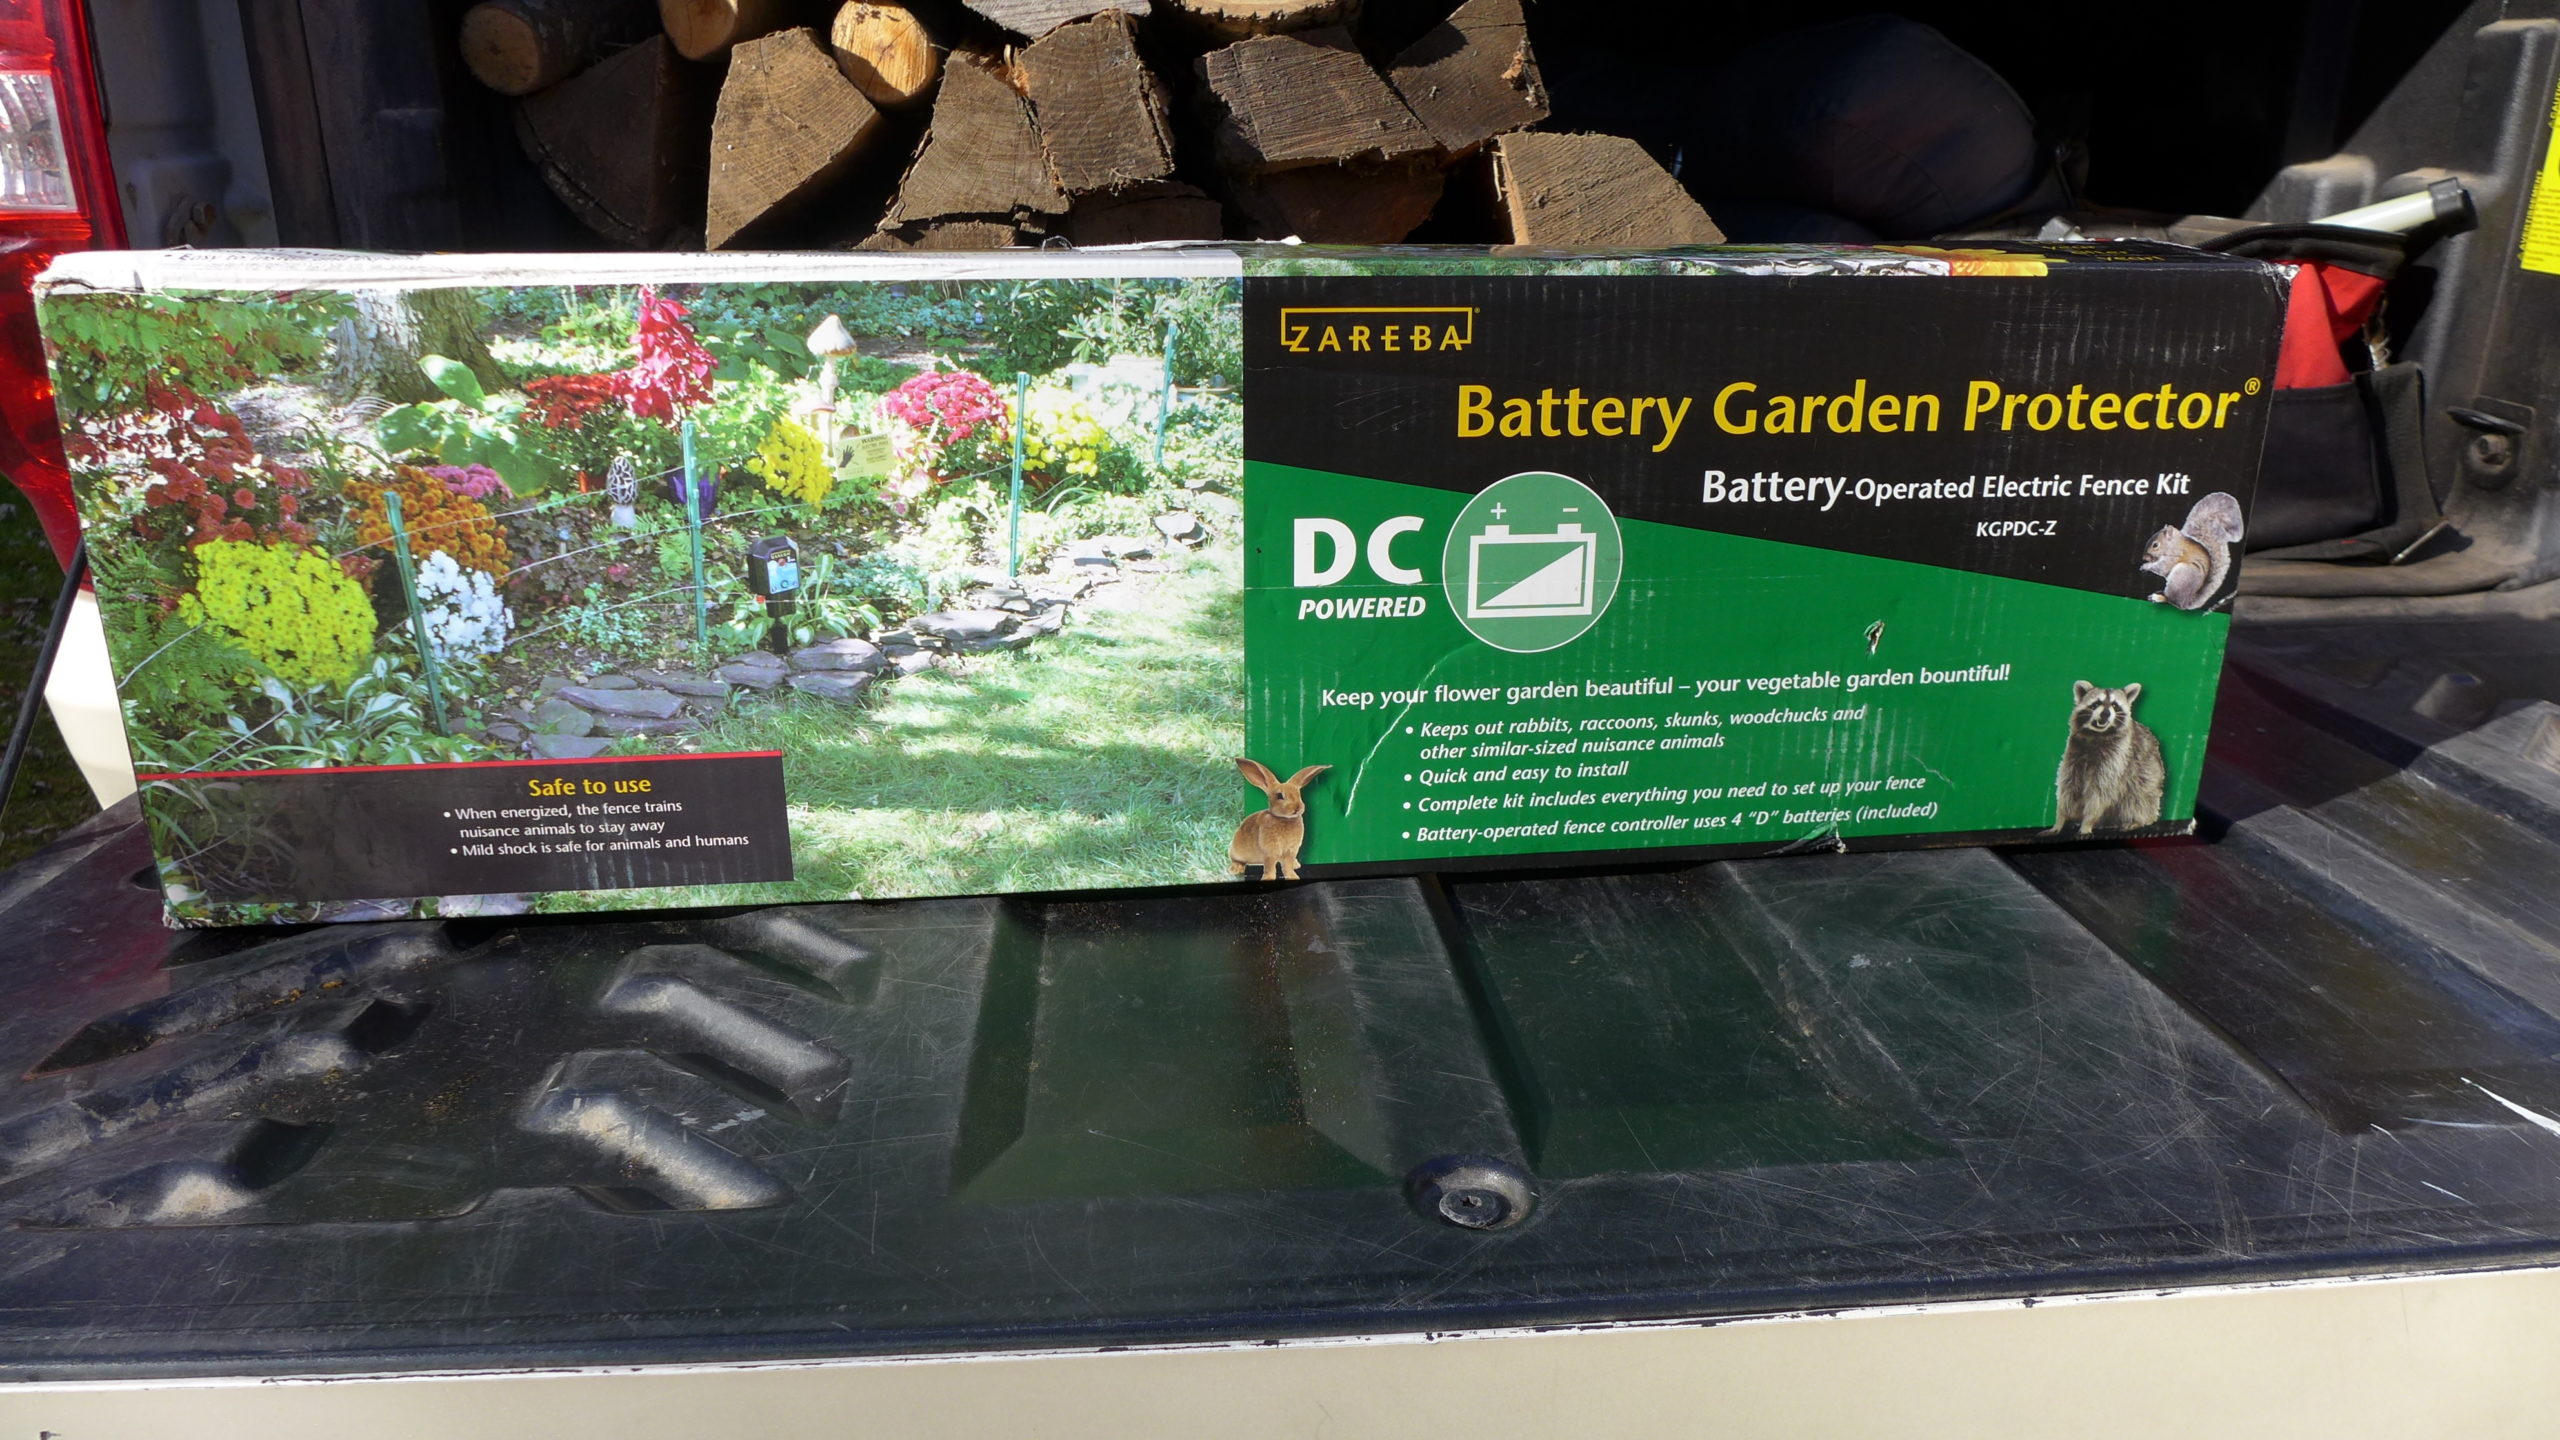 The Zebra Battery Garden Protector is about $120 for a starter electric fence that can protect most modest-size home veggie gardens.